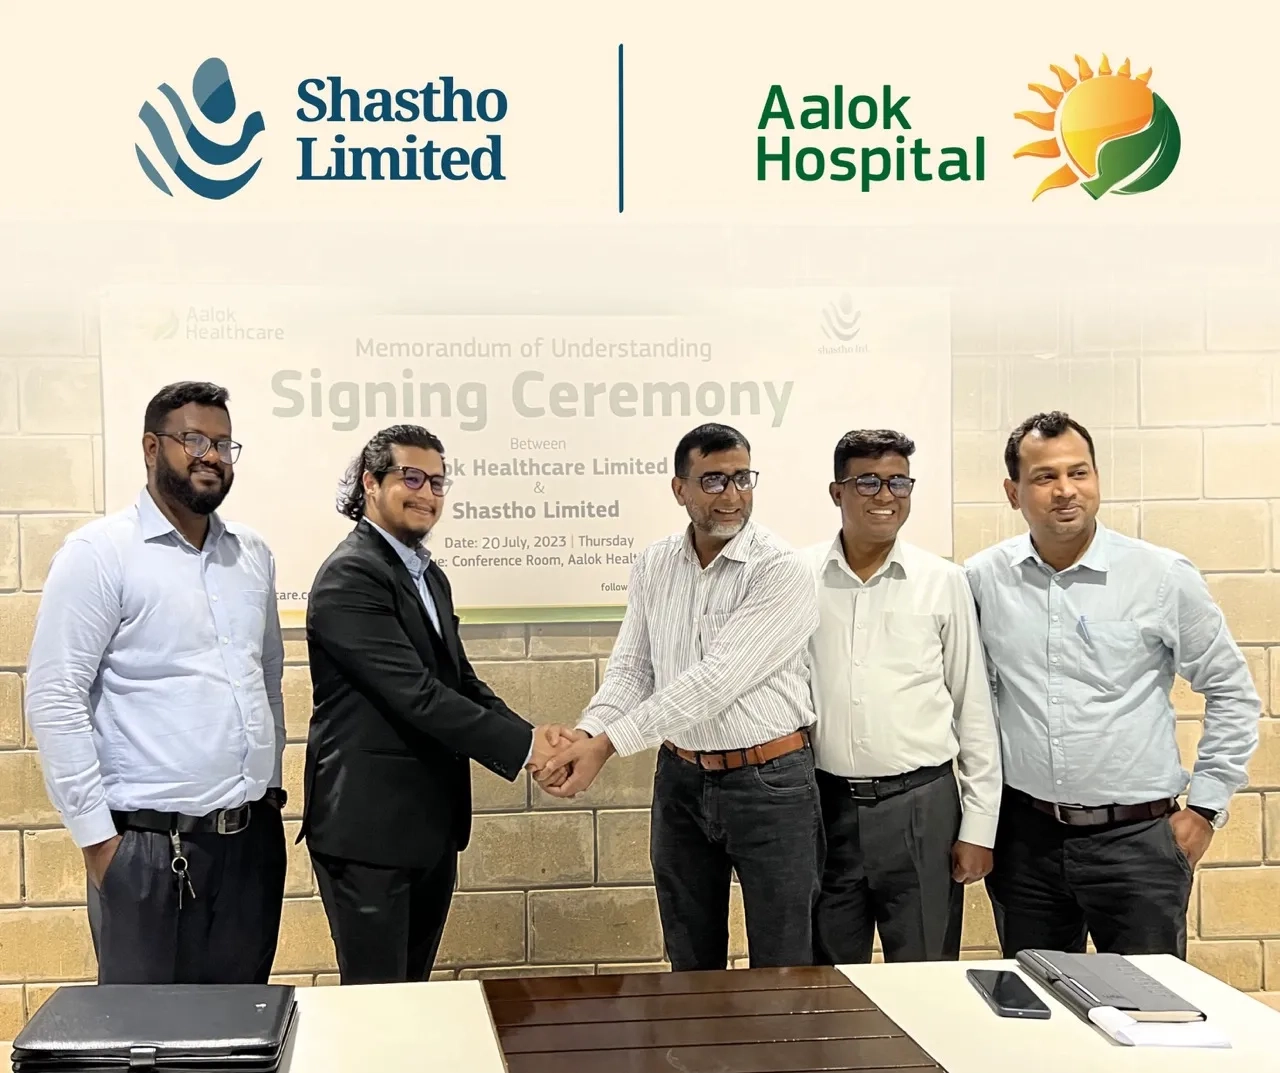 Partnership with Aalok Healthcare